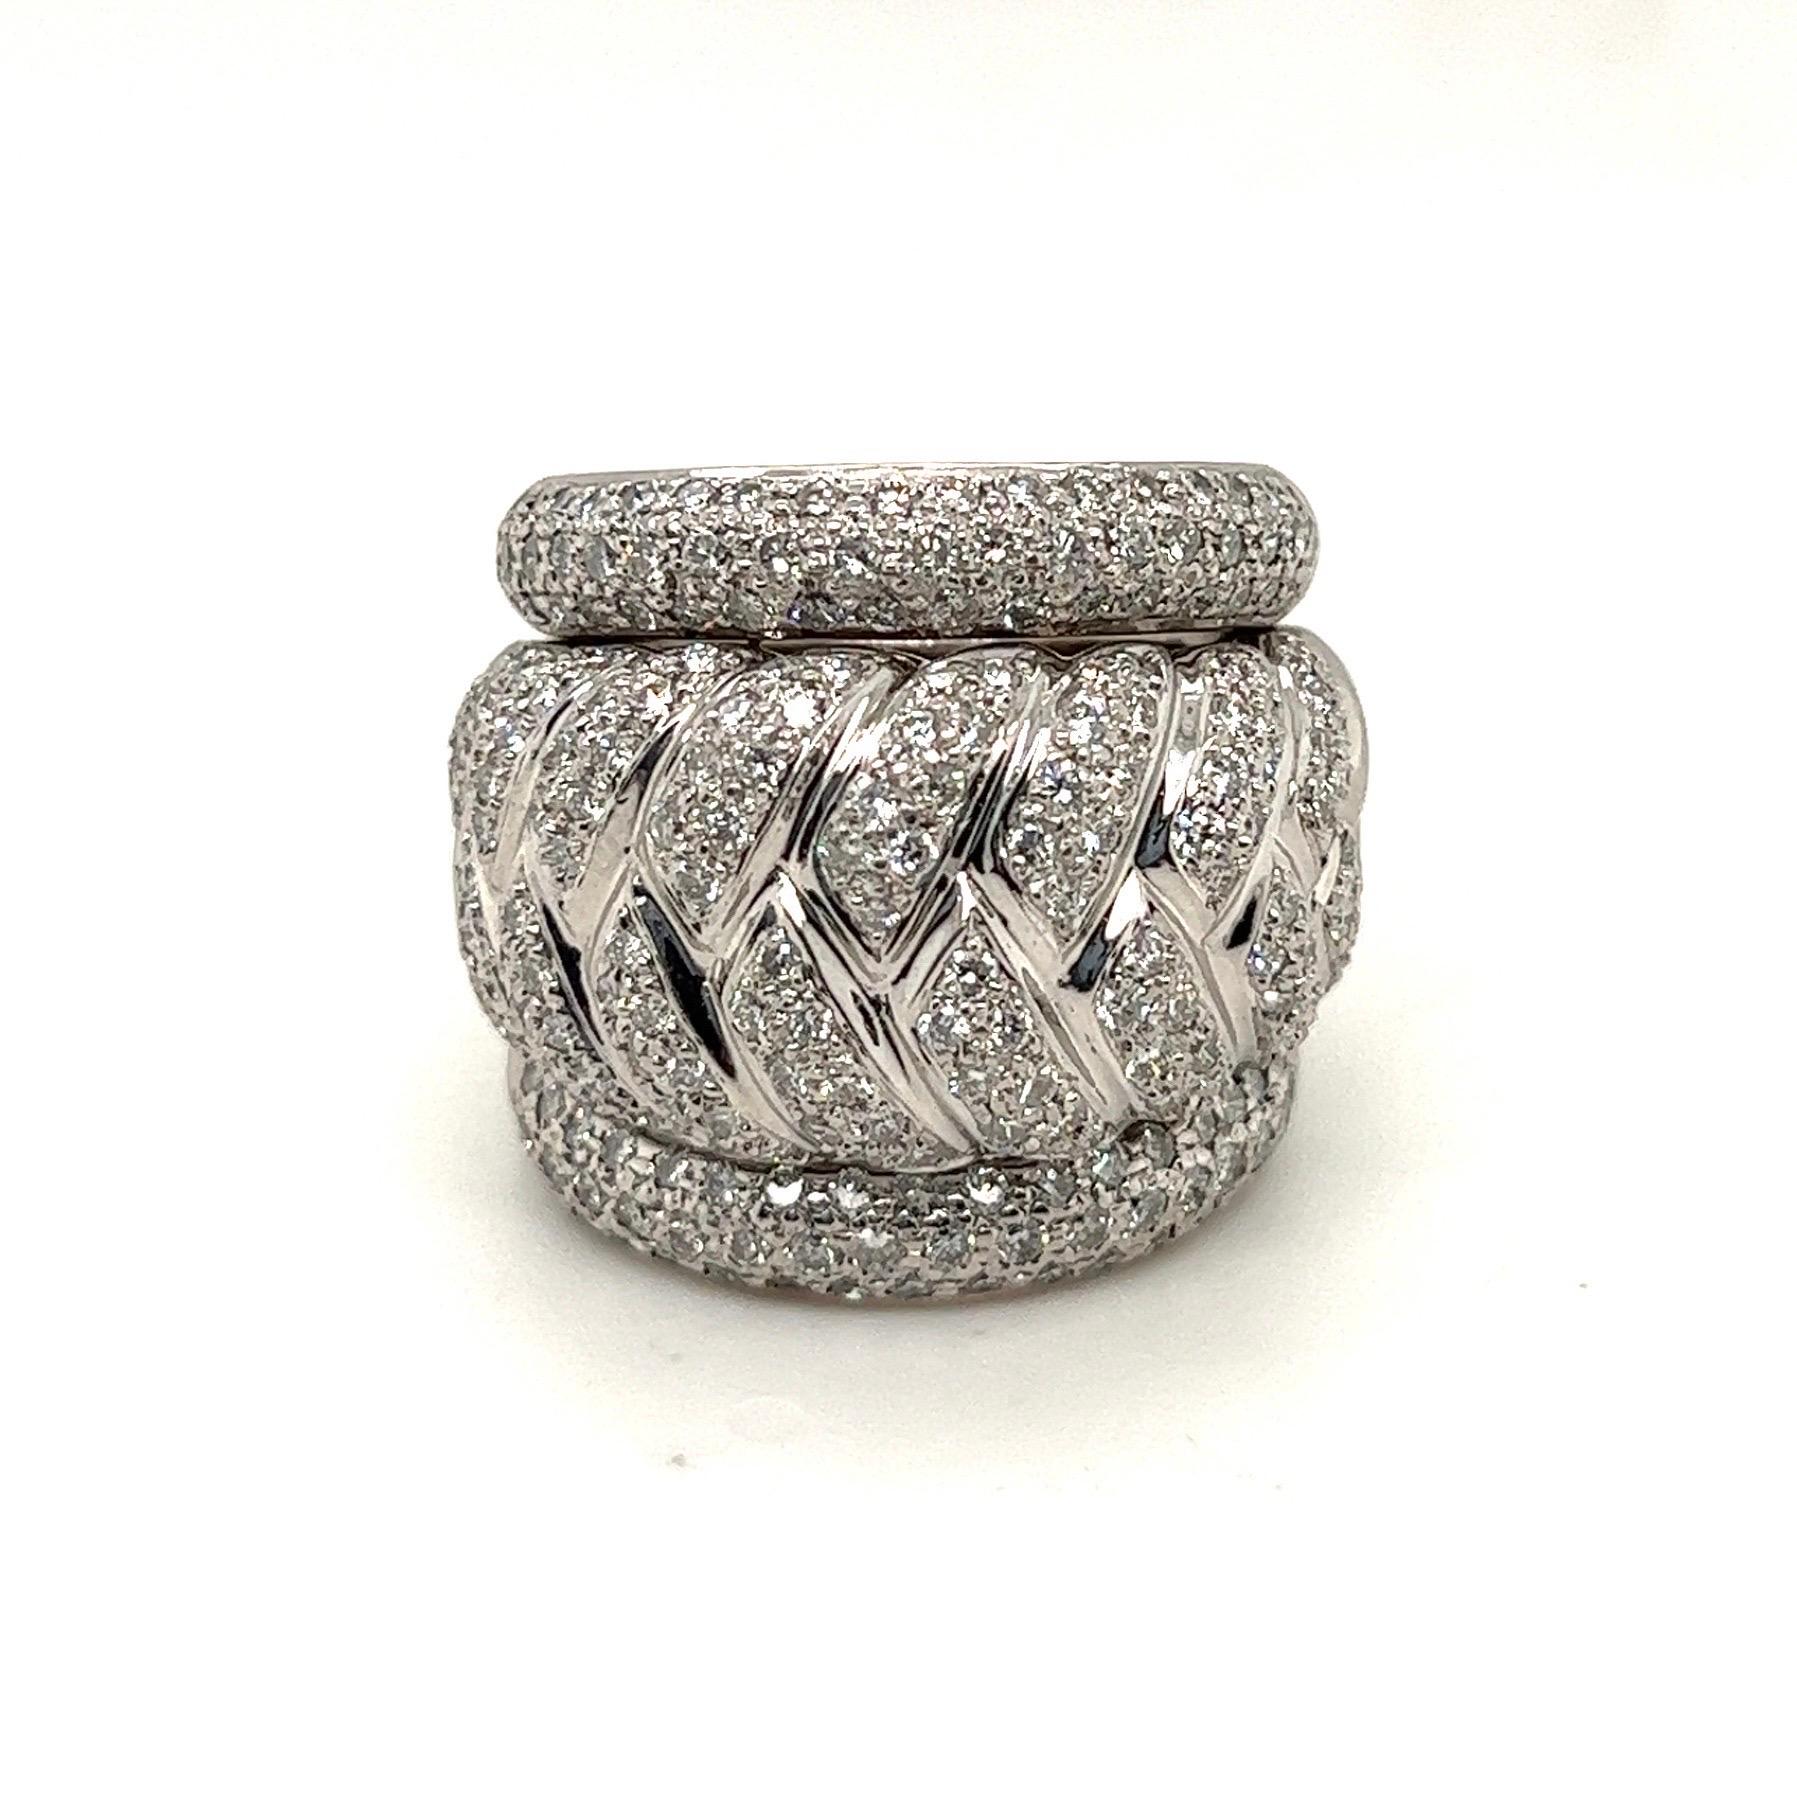 Contemporary 18 Karat White Gold and Diamond Cocktail Ring